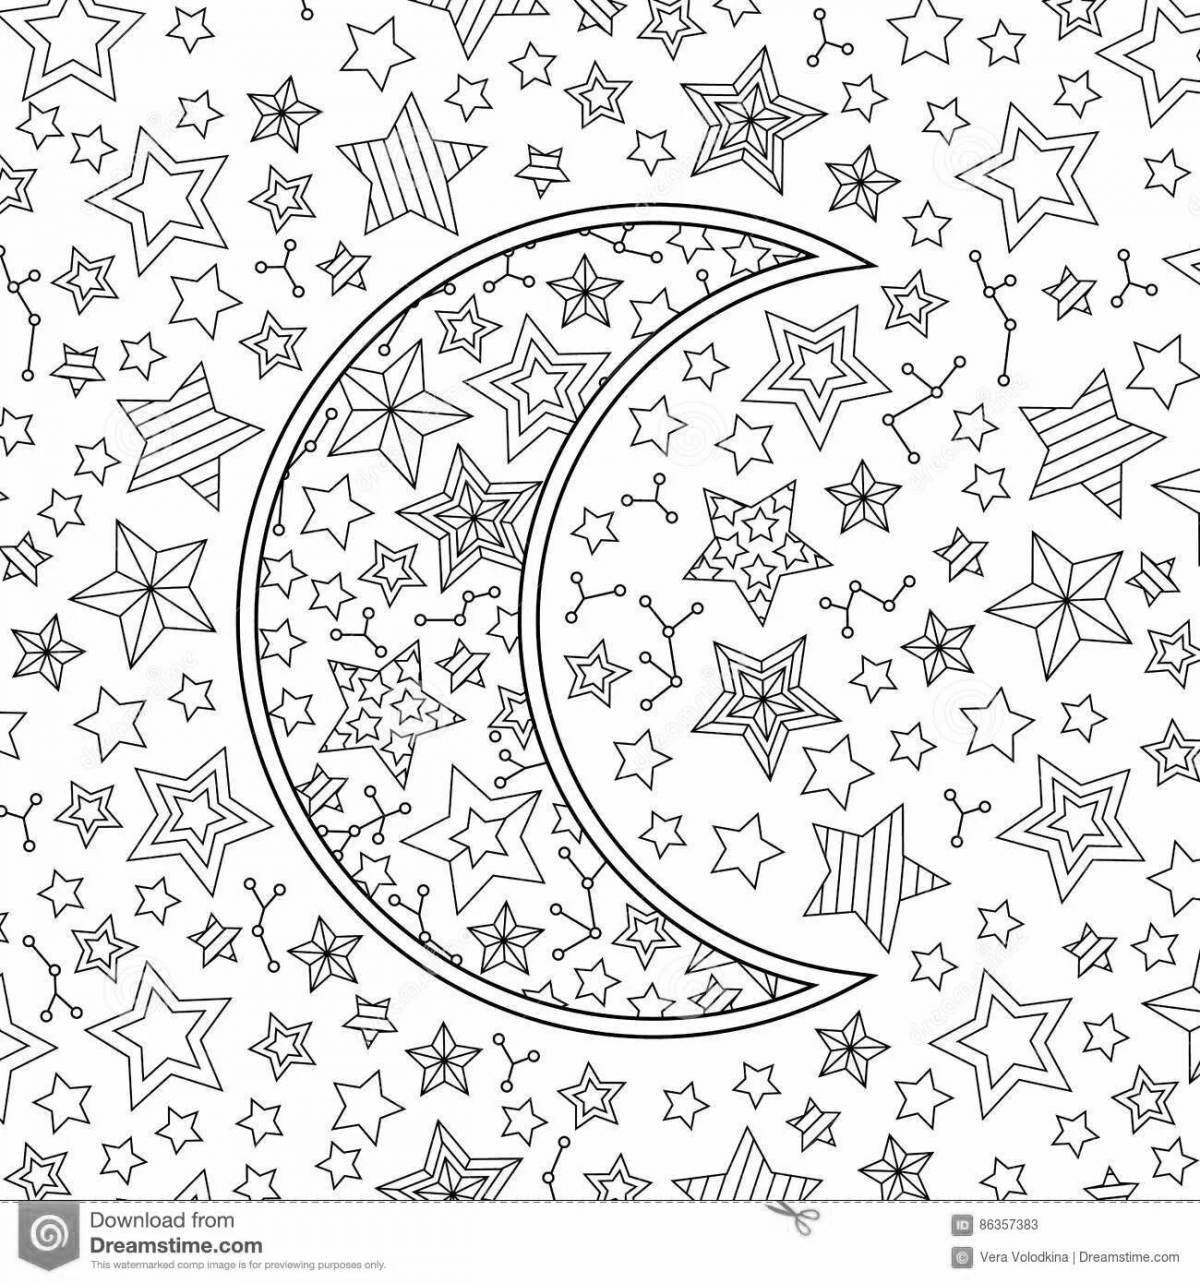 Mystical starry sky coloring book for kids